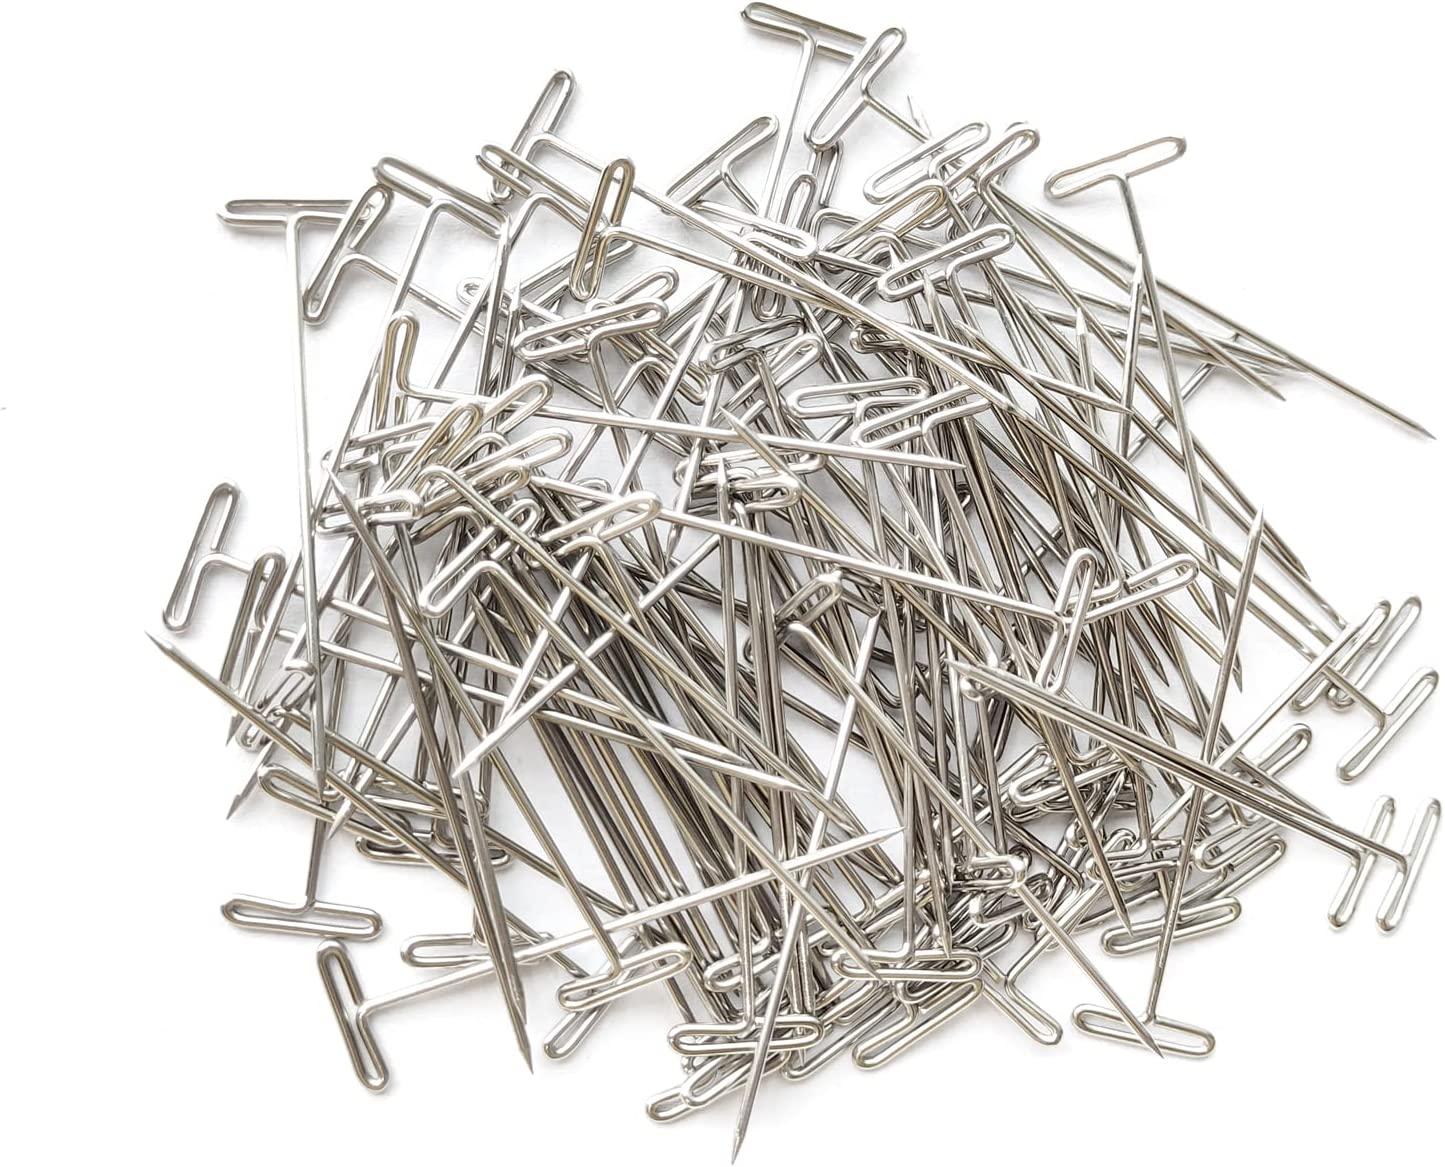 T Pins, 50 Pack 2 inch T-Pins, T Pins for Blocking Knitting, Wig Pins, T  Pins for Wigs, Wig Pins for Foam Head, T Pins for Sewing, Wig T Pins,  Blocking Pins